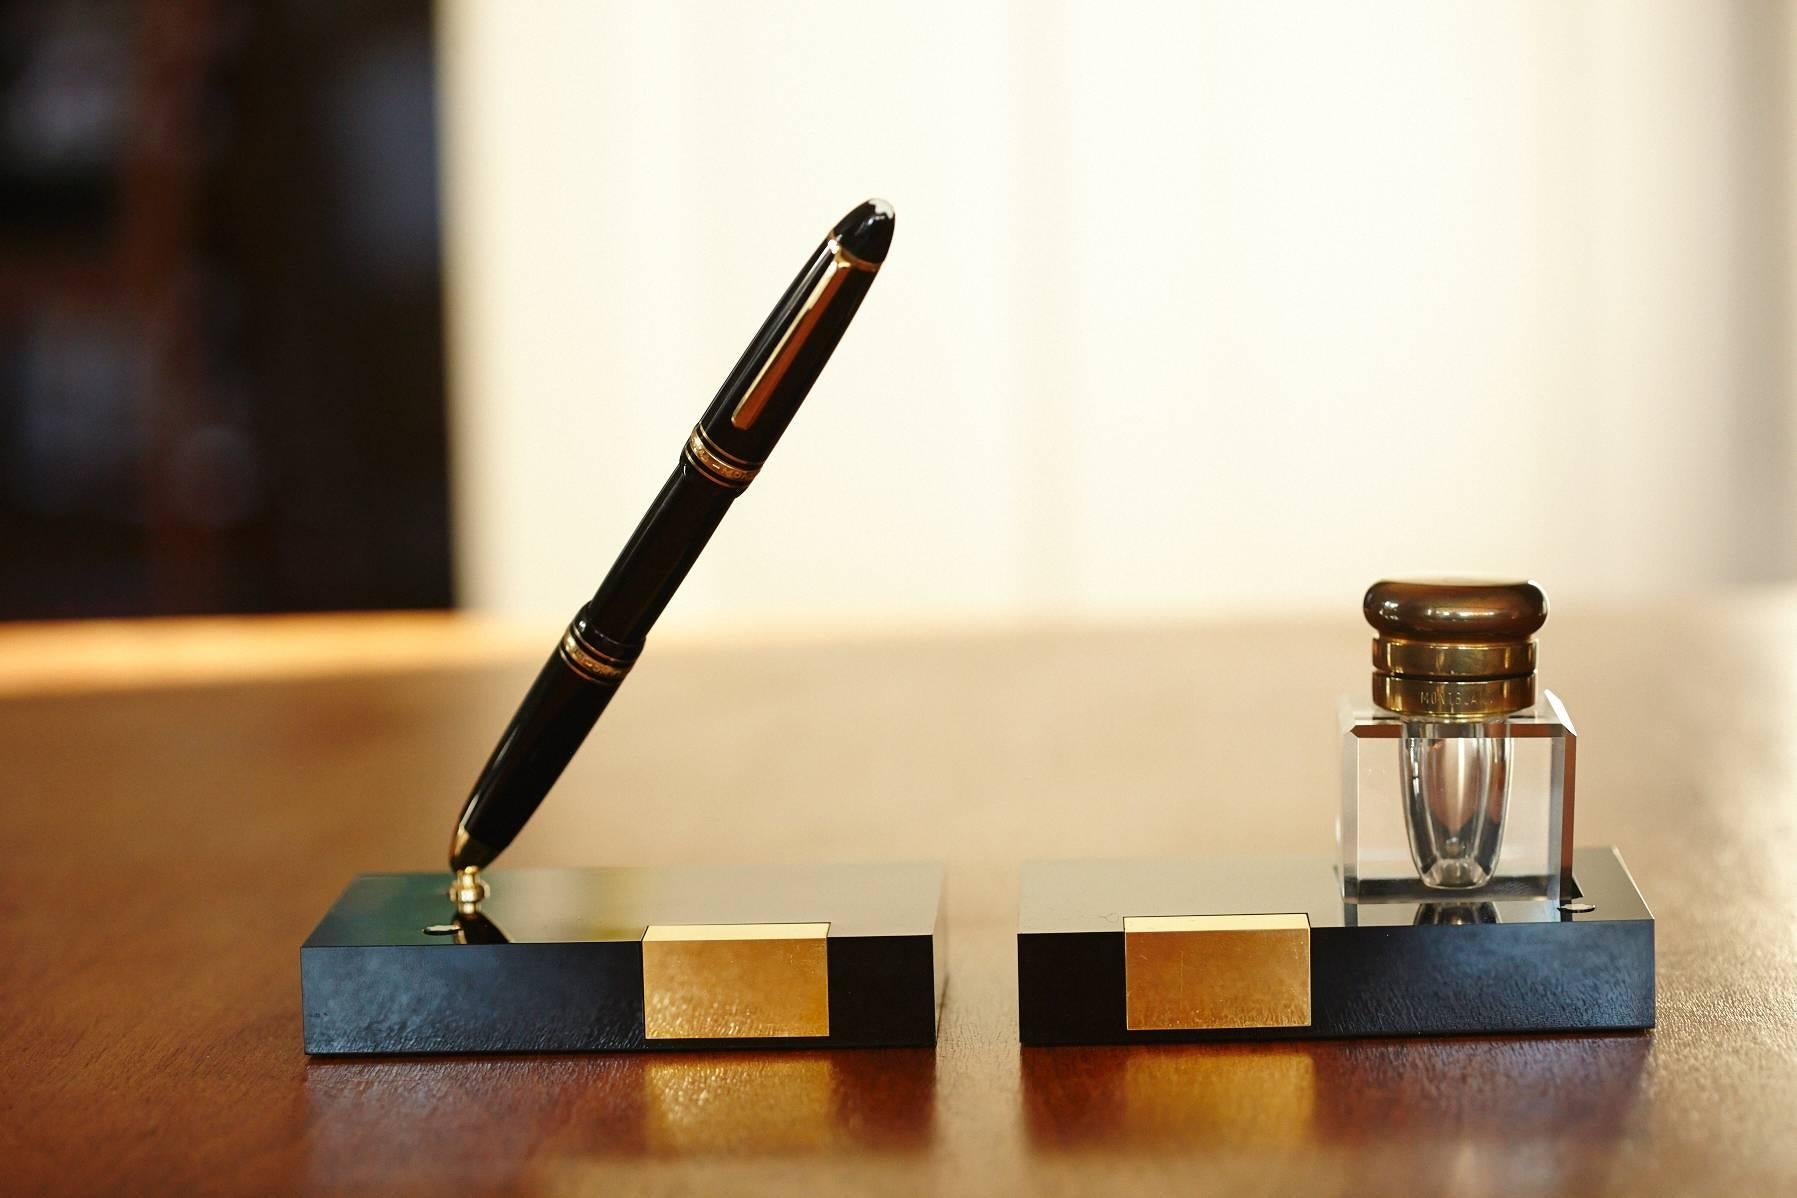 Très chic, never used Montblanc writing set, composed of a fountain pen holder and a leaded crystal inkwell with a heavy brass lid on a shiny black resin base,
circa 1960s.
The Montblanc fountain pen 